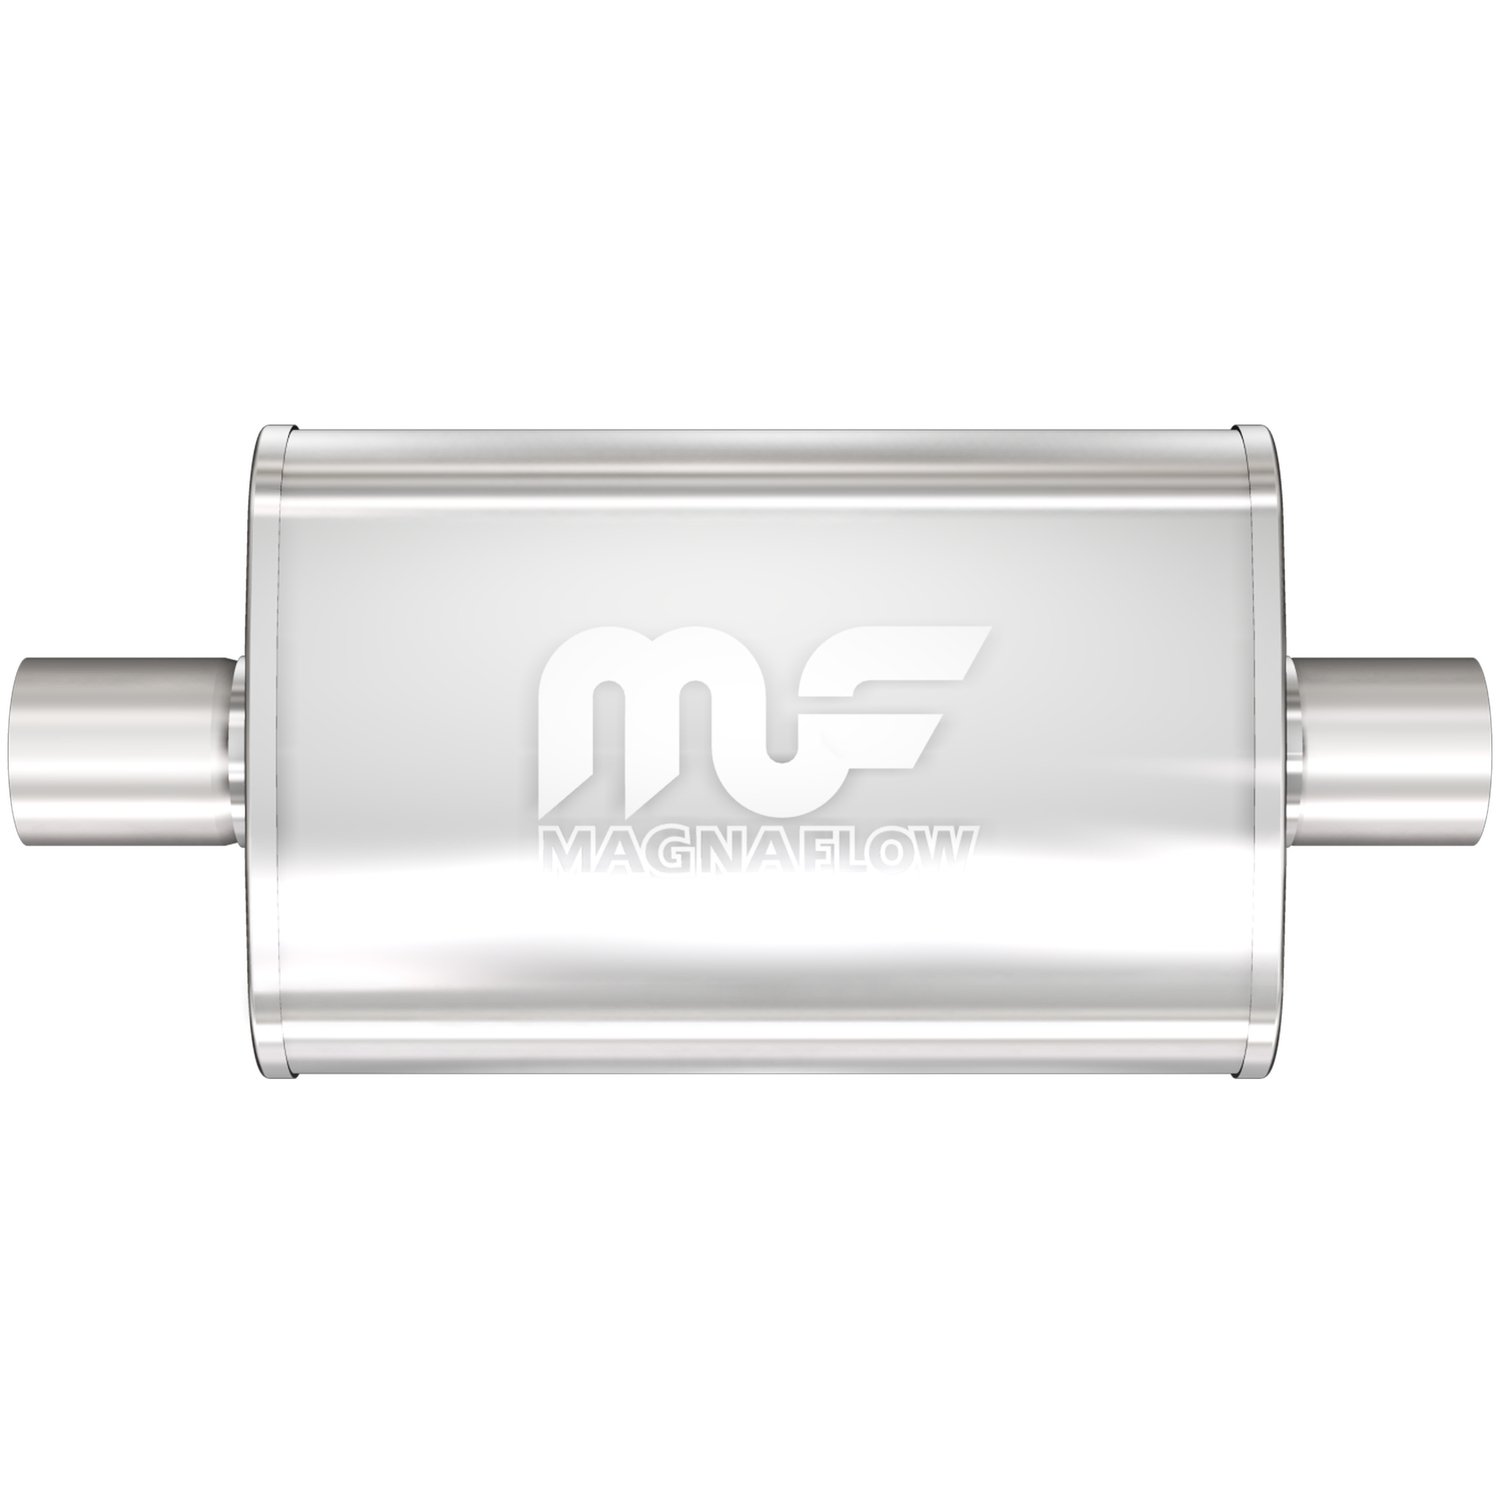 4" x 9" Oval Muffler Center In/Center Out: 2.25"/2.25" Body Length: 18" Overall Length: 24" Core Size: 2.5" Satin Finish